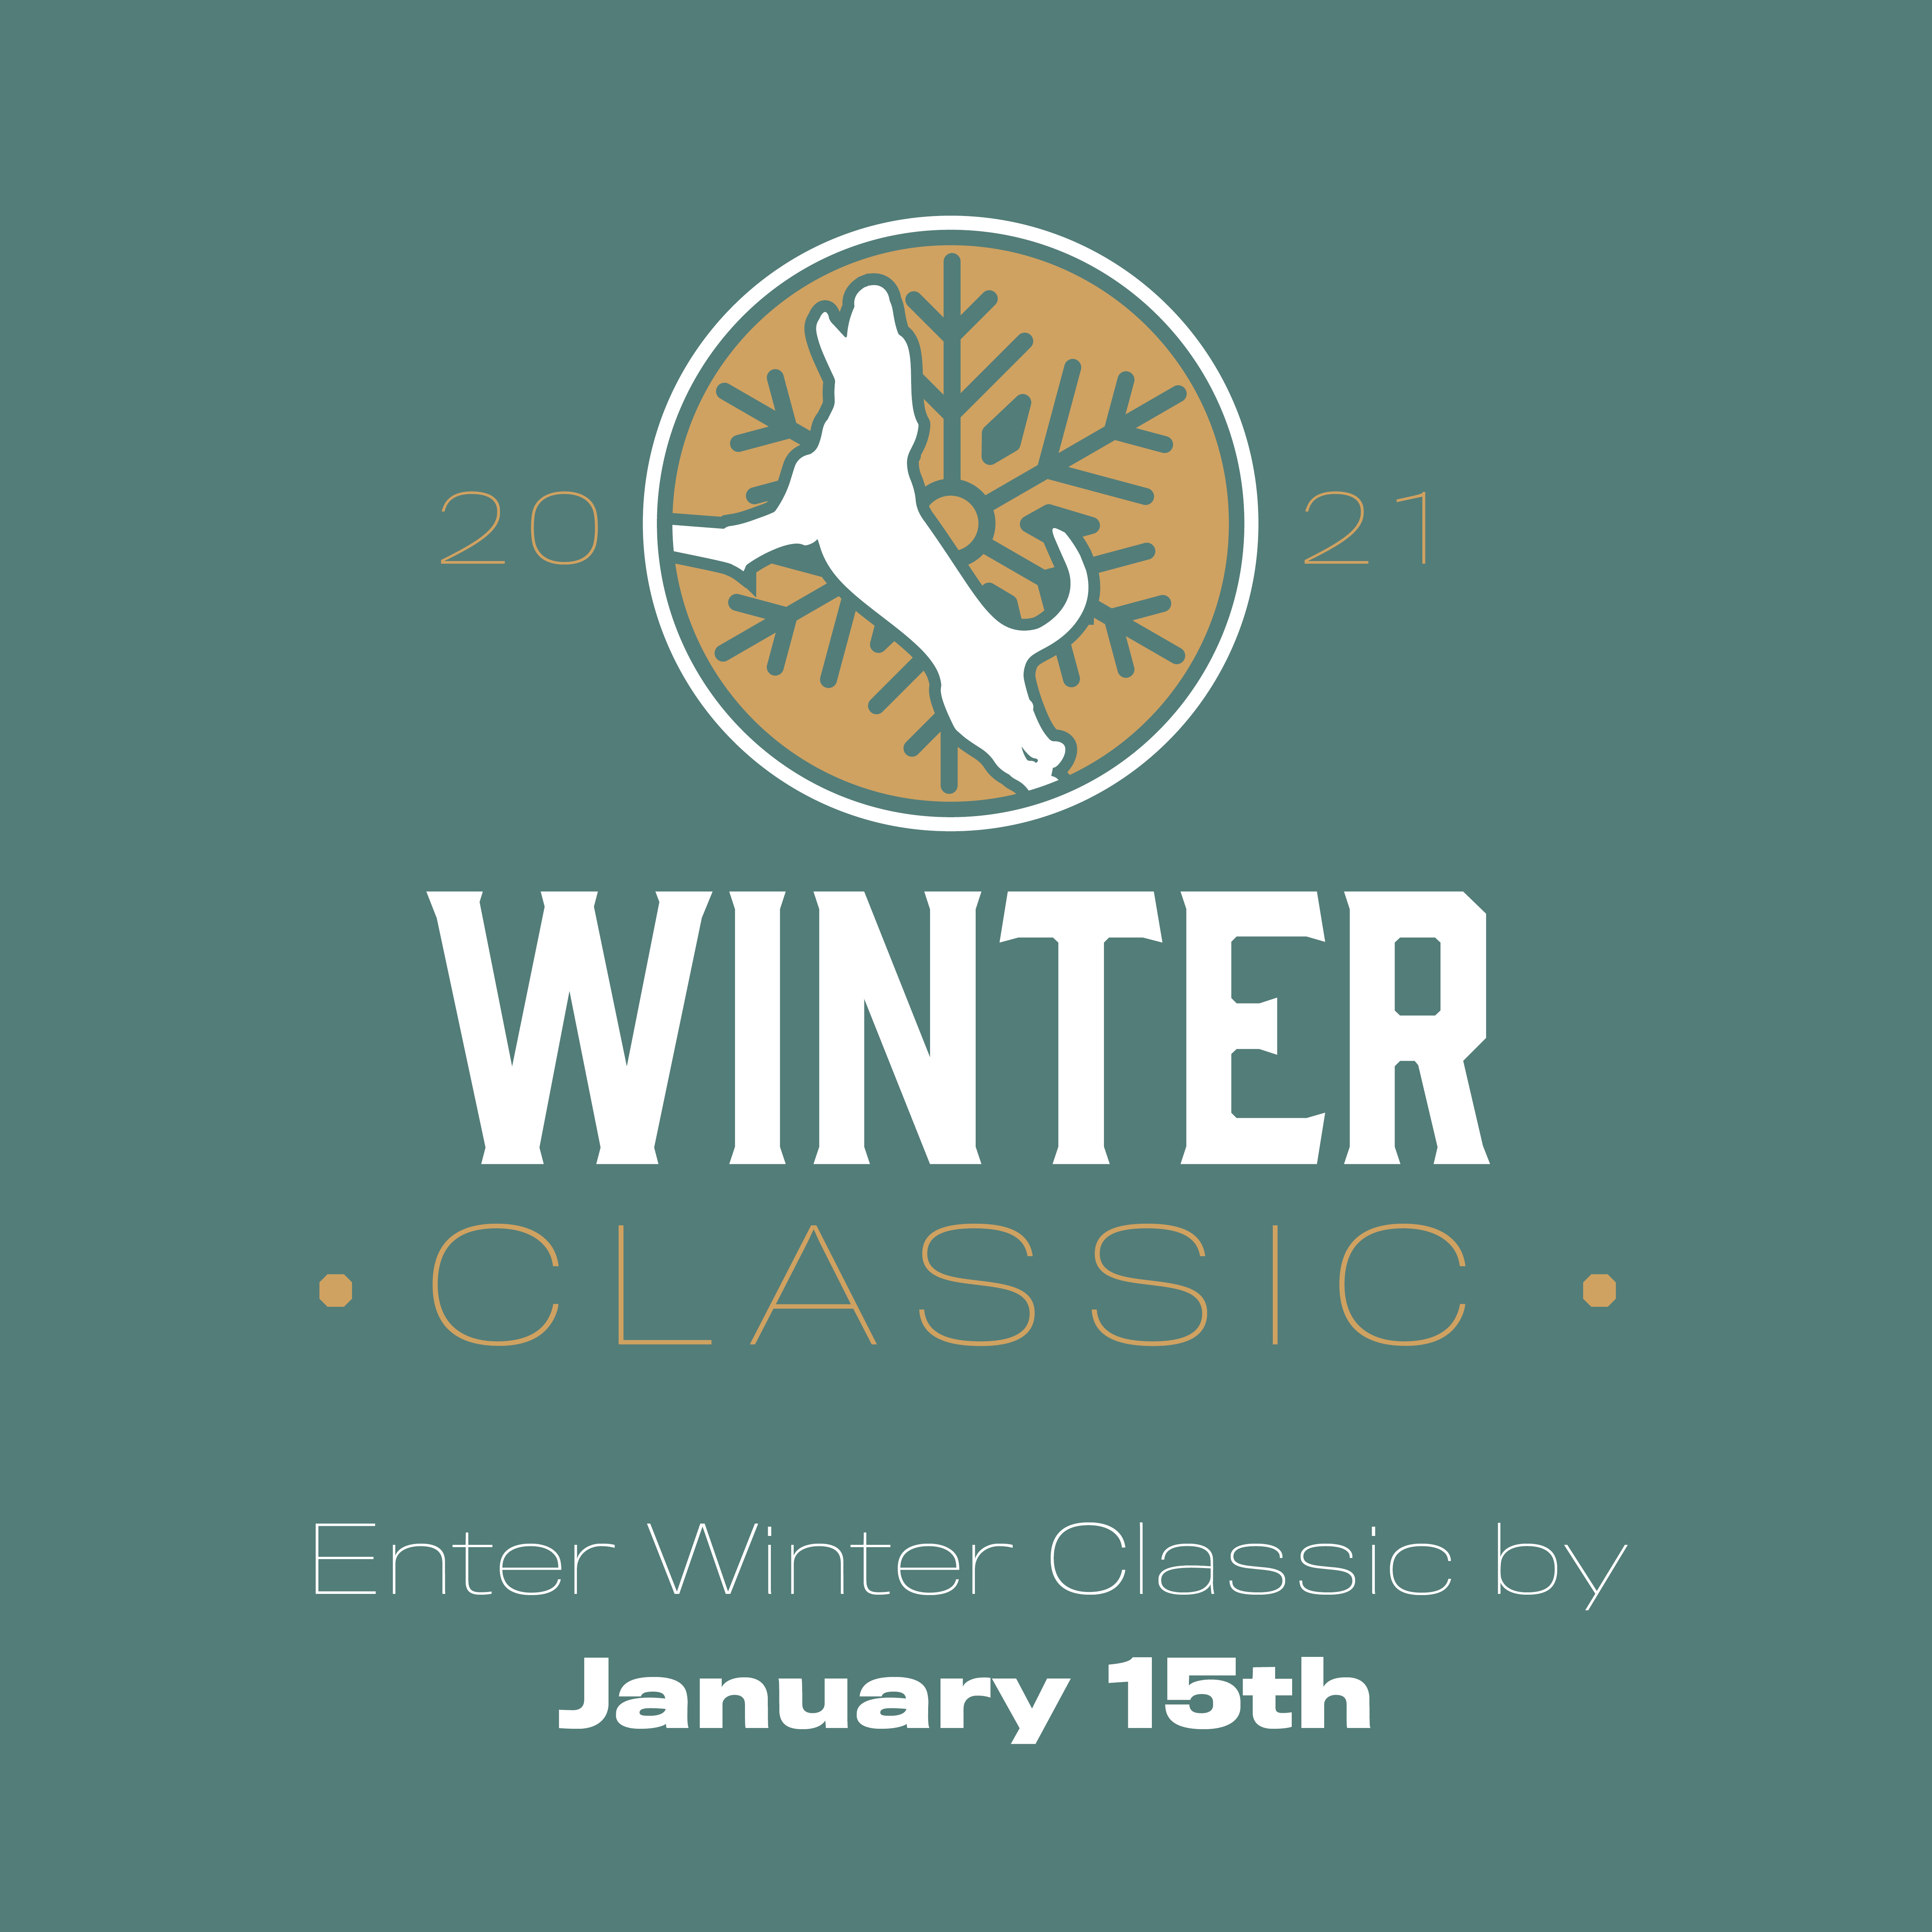 UKC Winter Classic. Enter Winter Classic by January 15th. 